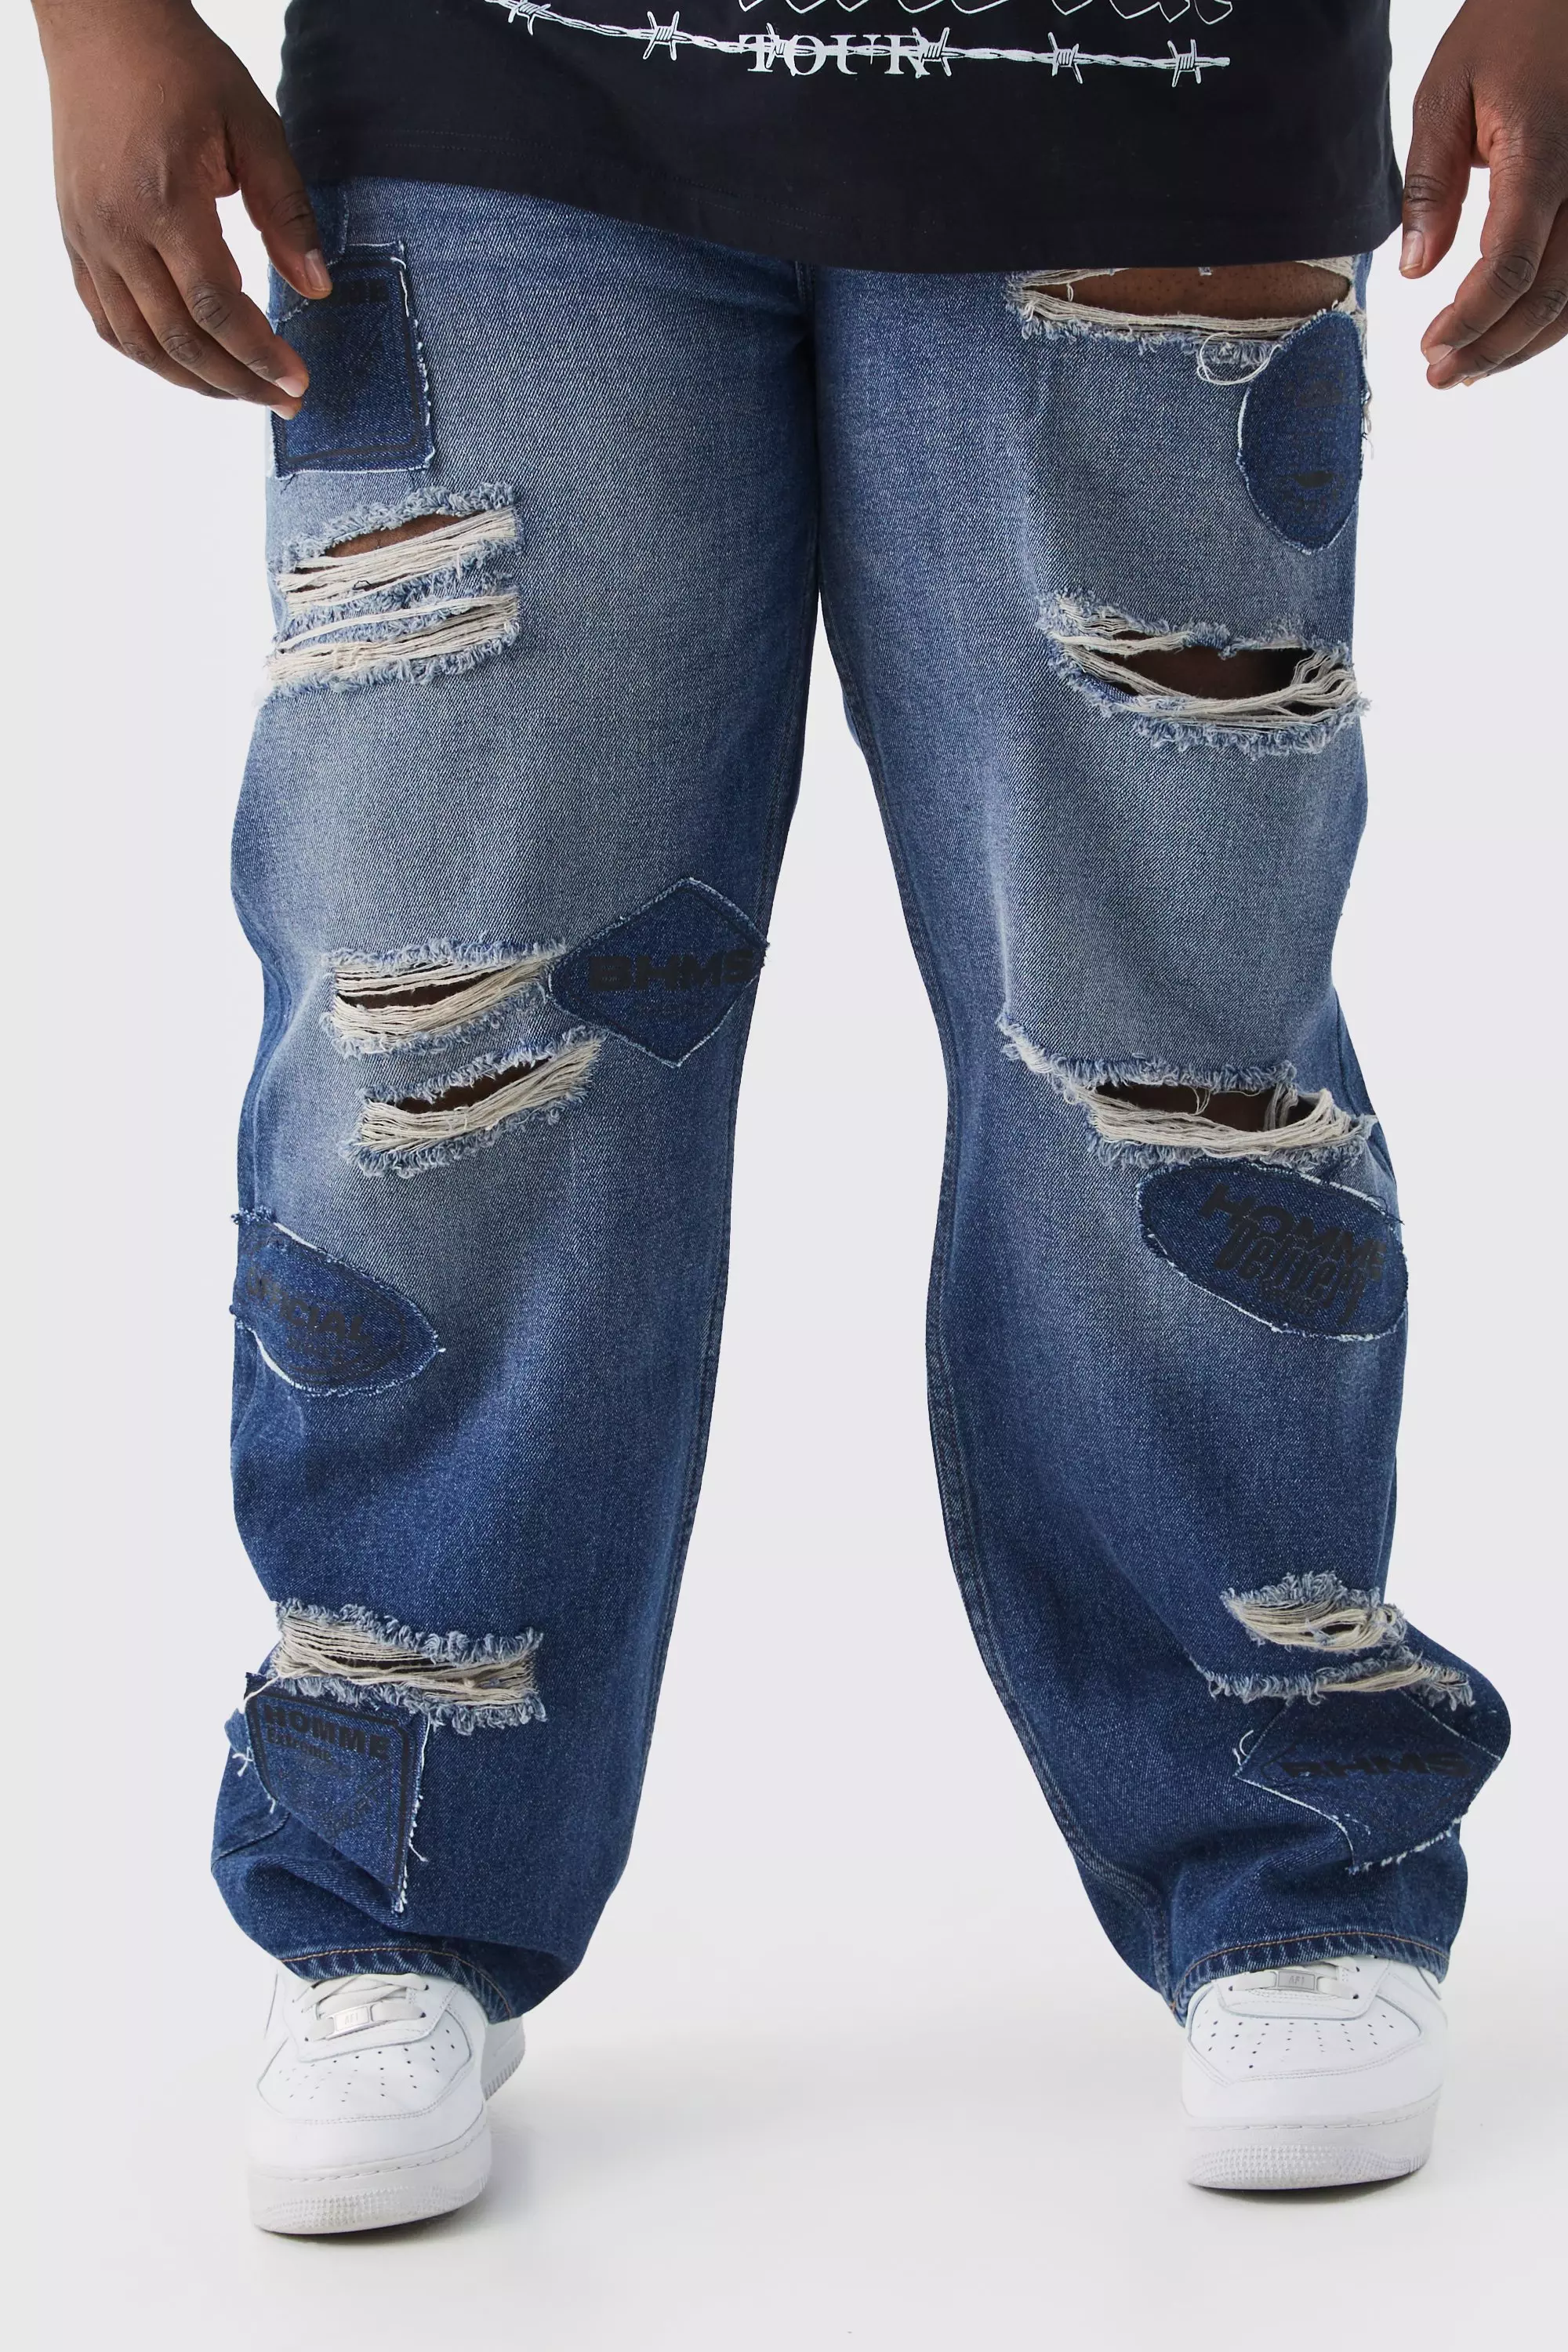 Plus Relaxed Rigid Applique Ripped Jeans Antique blue